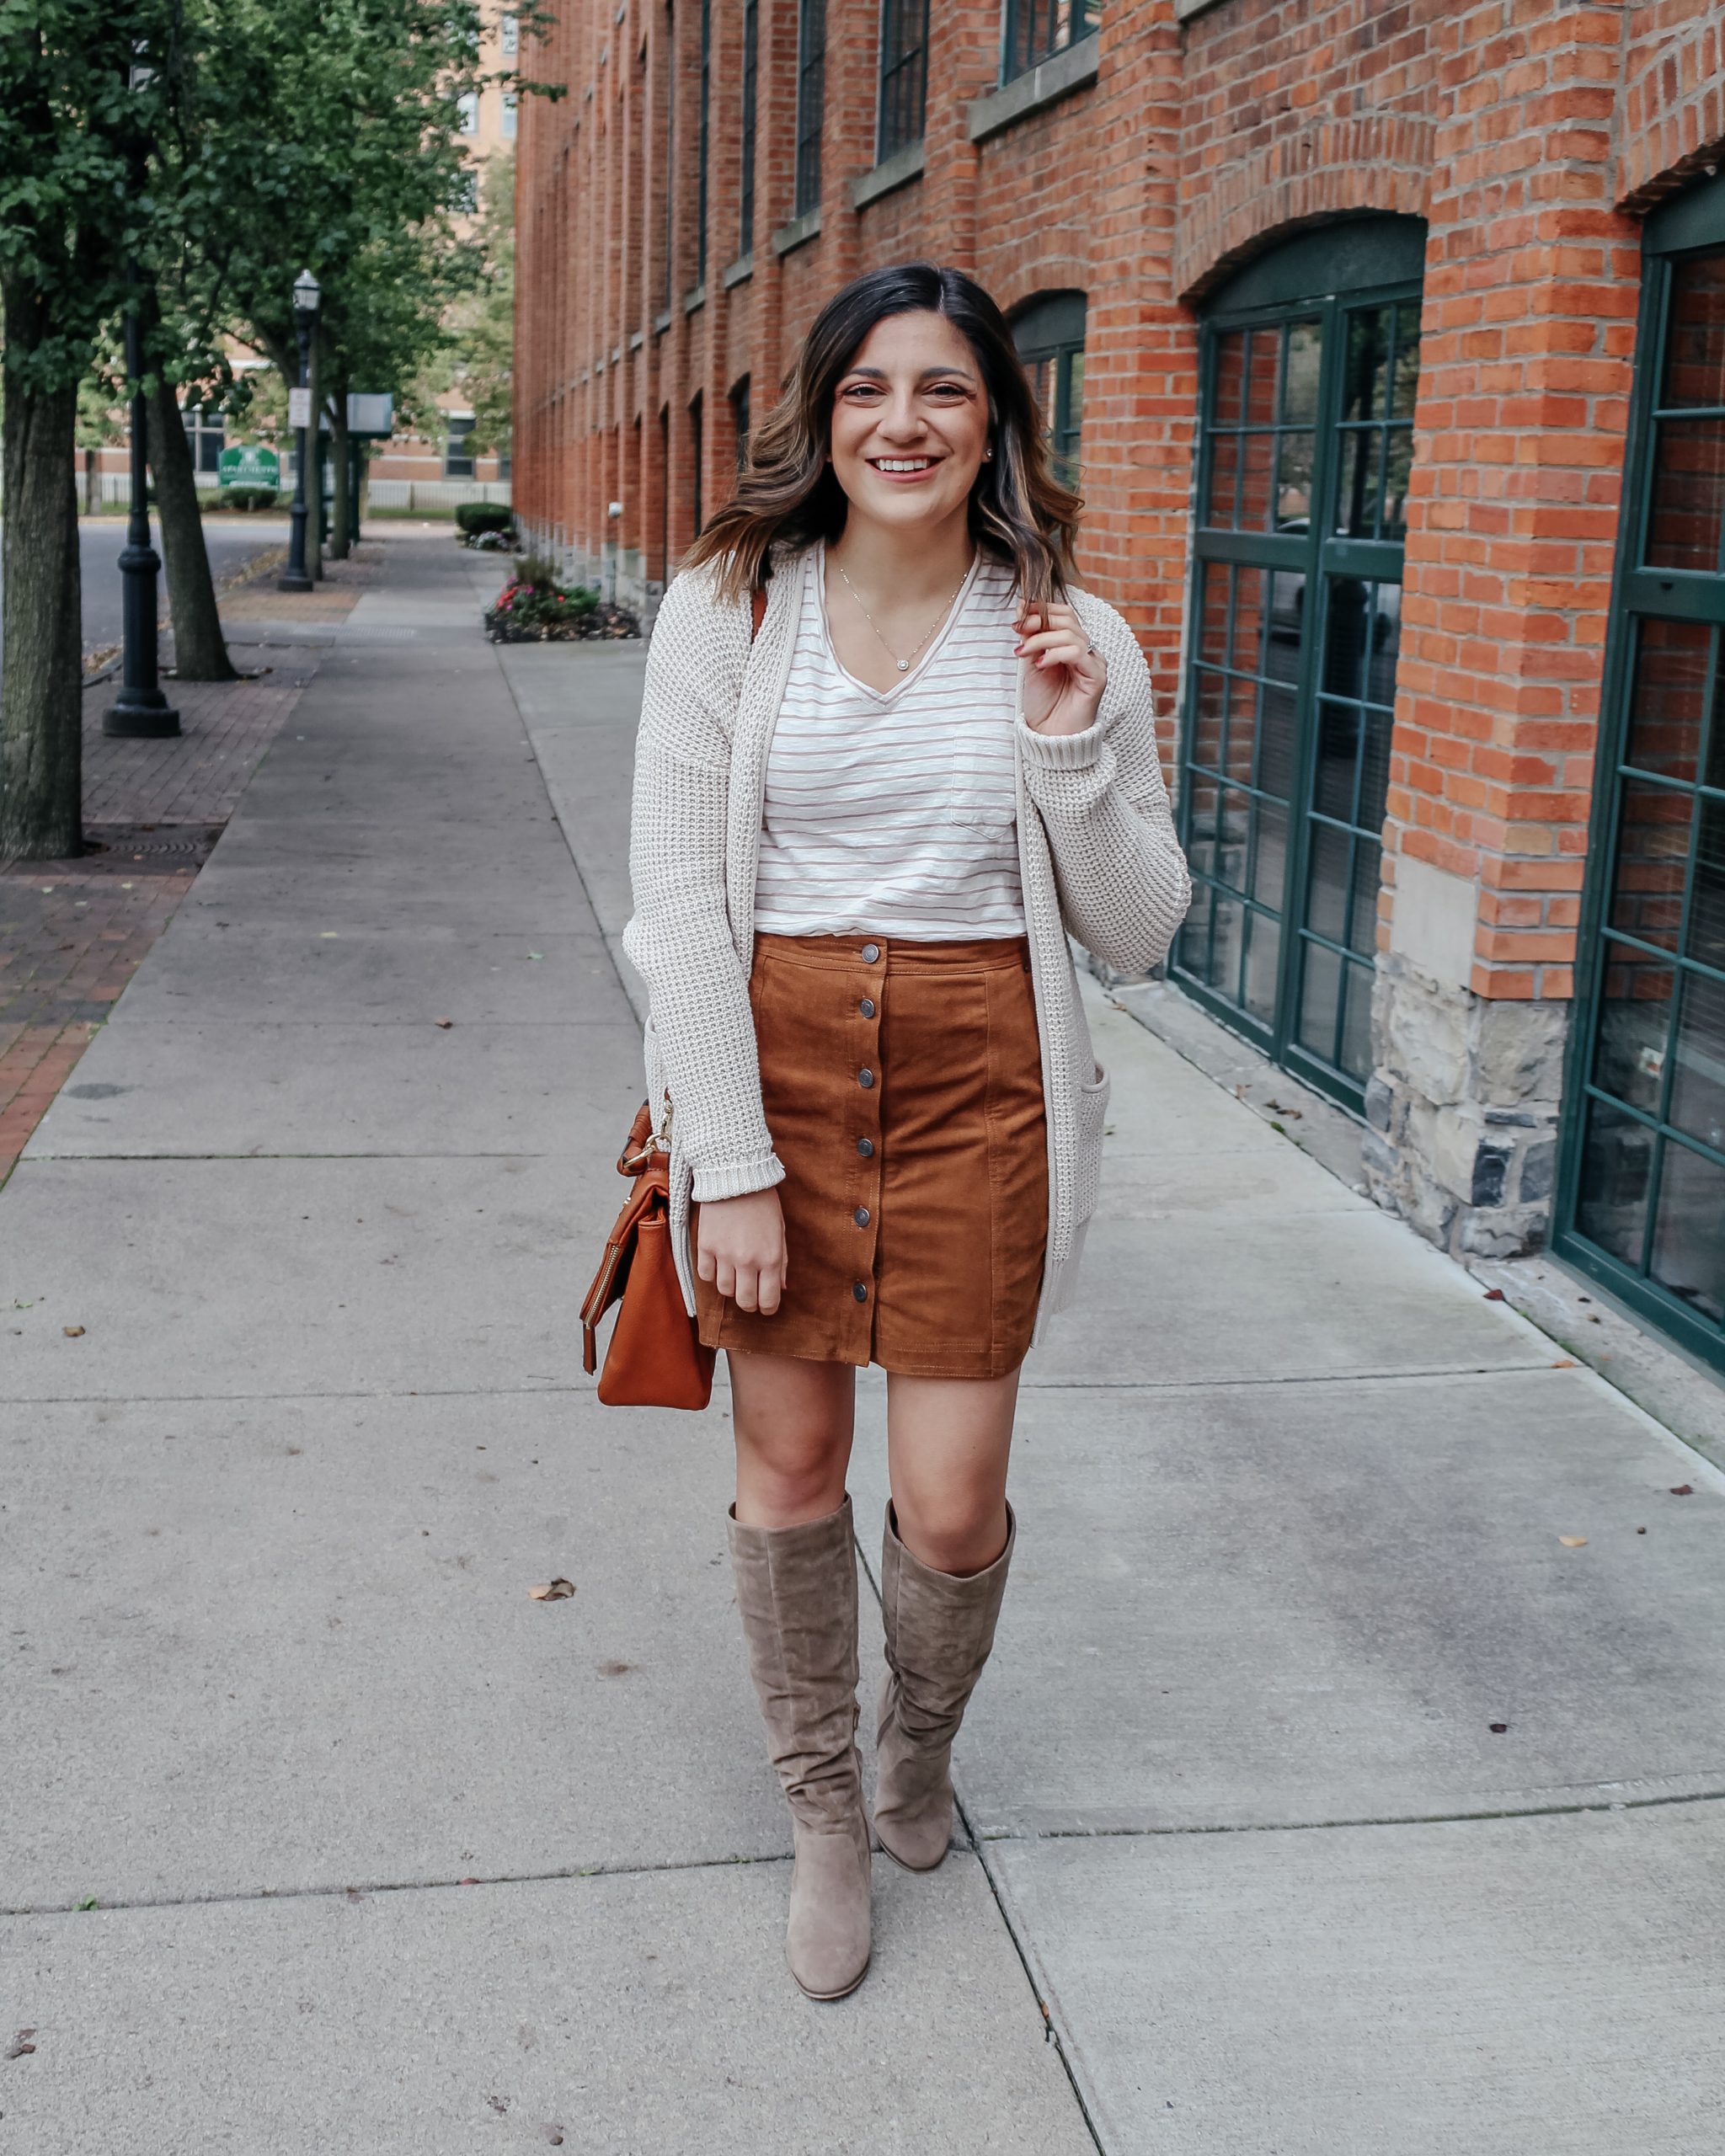 3 Items to Add to Your Fall Capsule Wardrobe | KMM Lifestyle